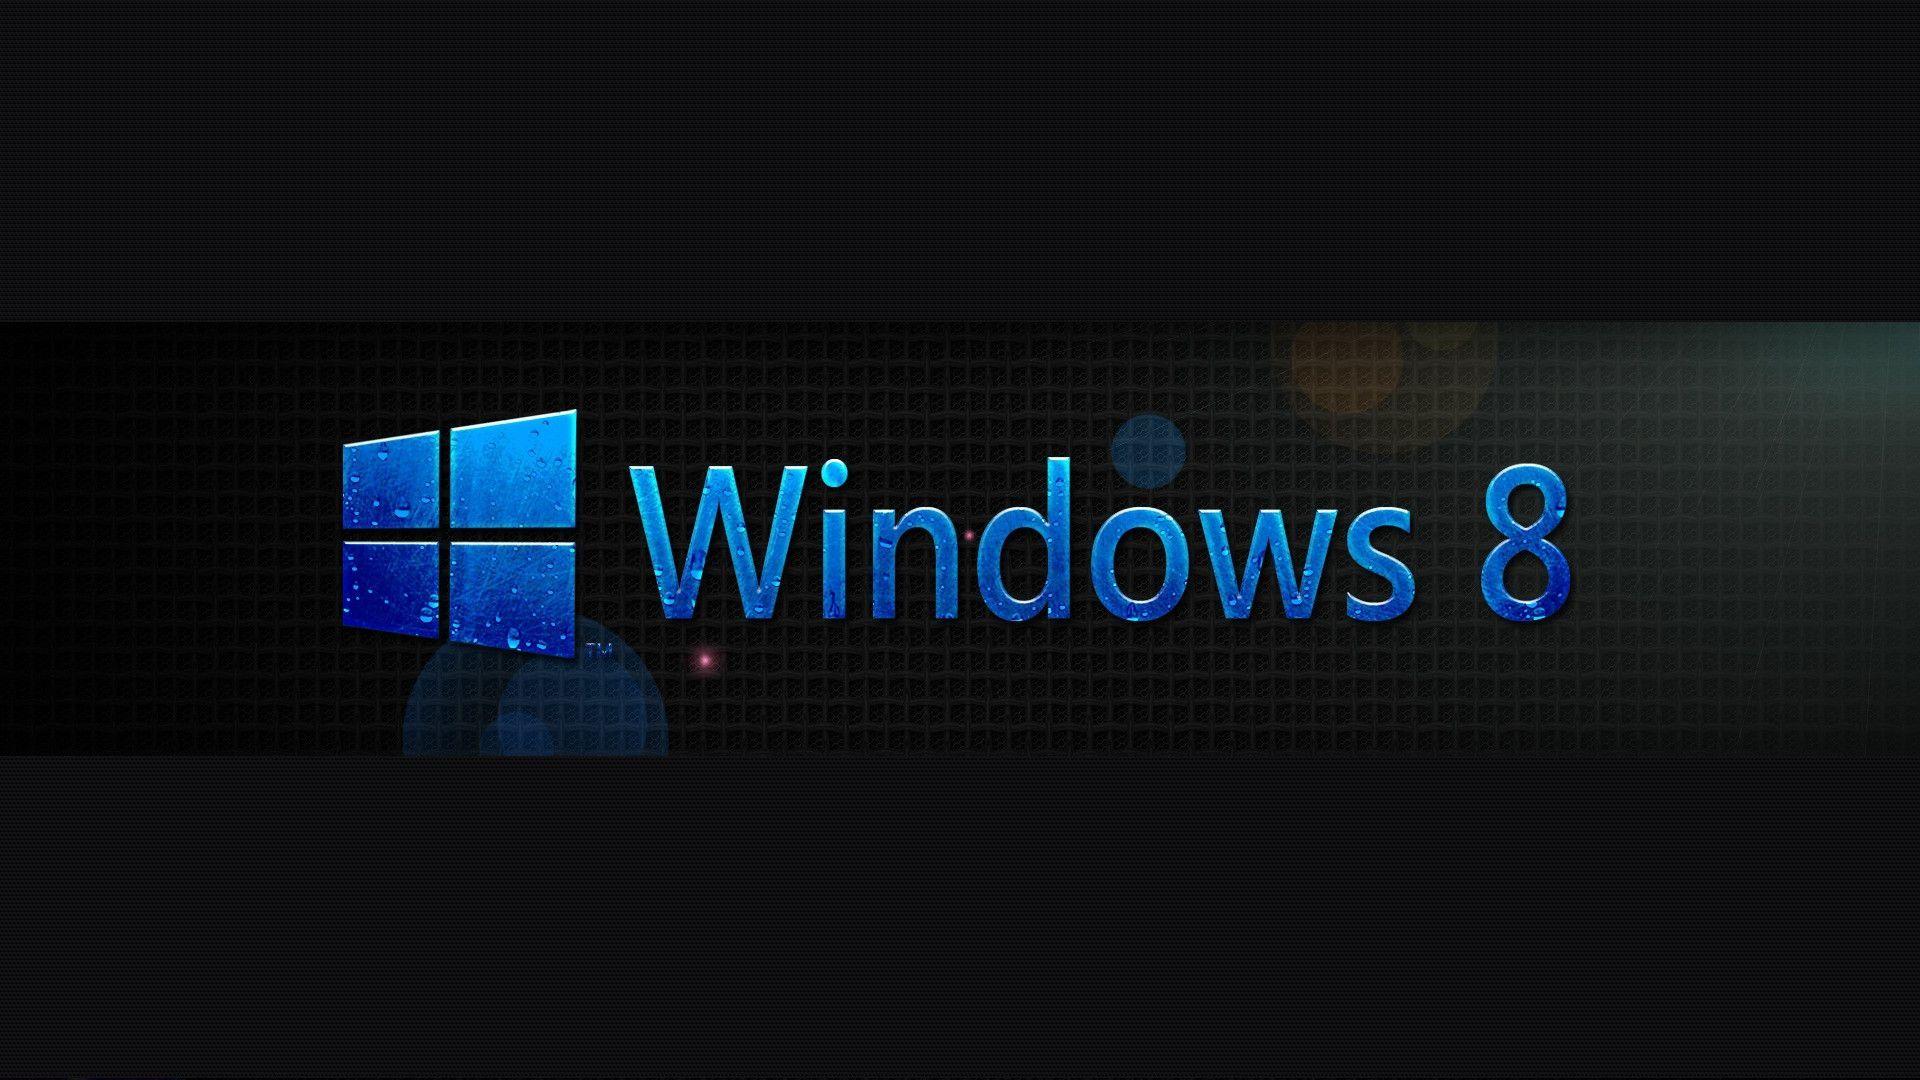 Download these 44 HD Windows 8 Wallpaper Image